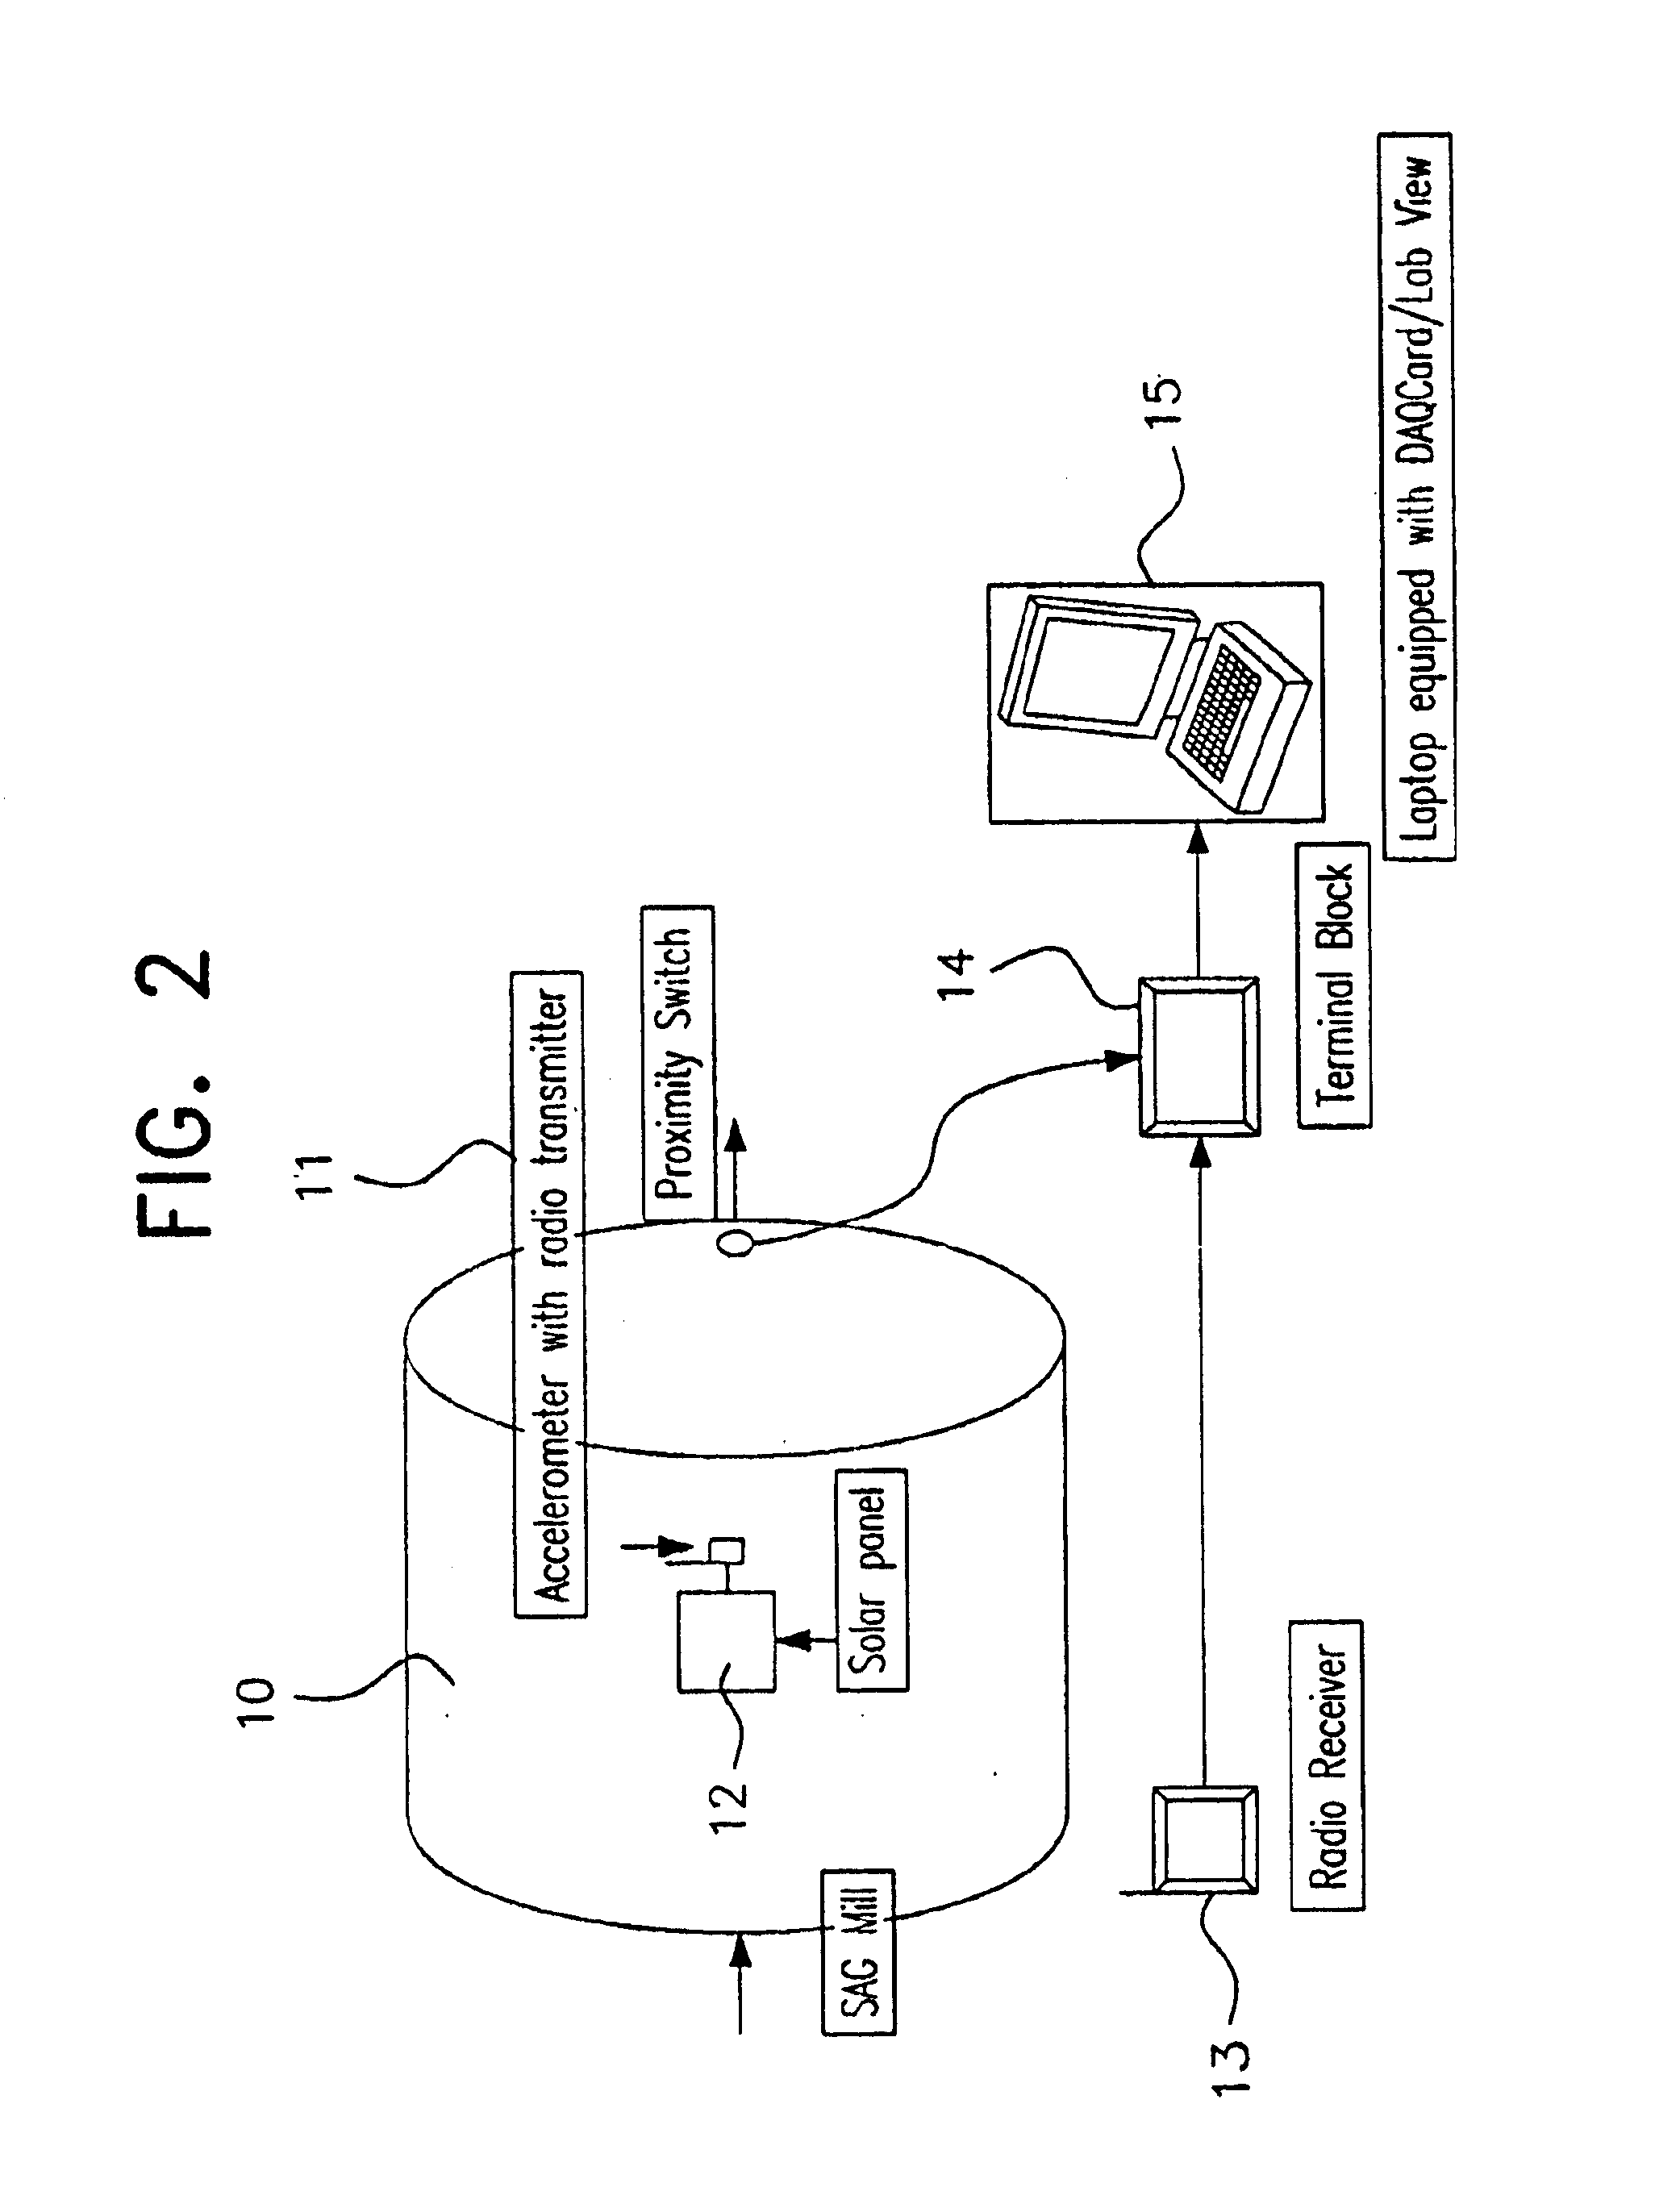 System for monitoring mechanical waves from a moving machine